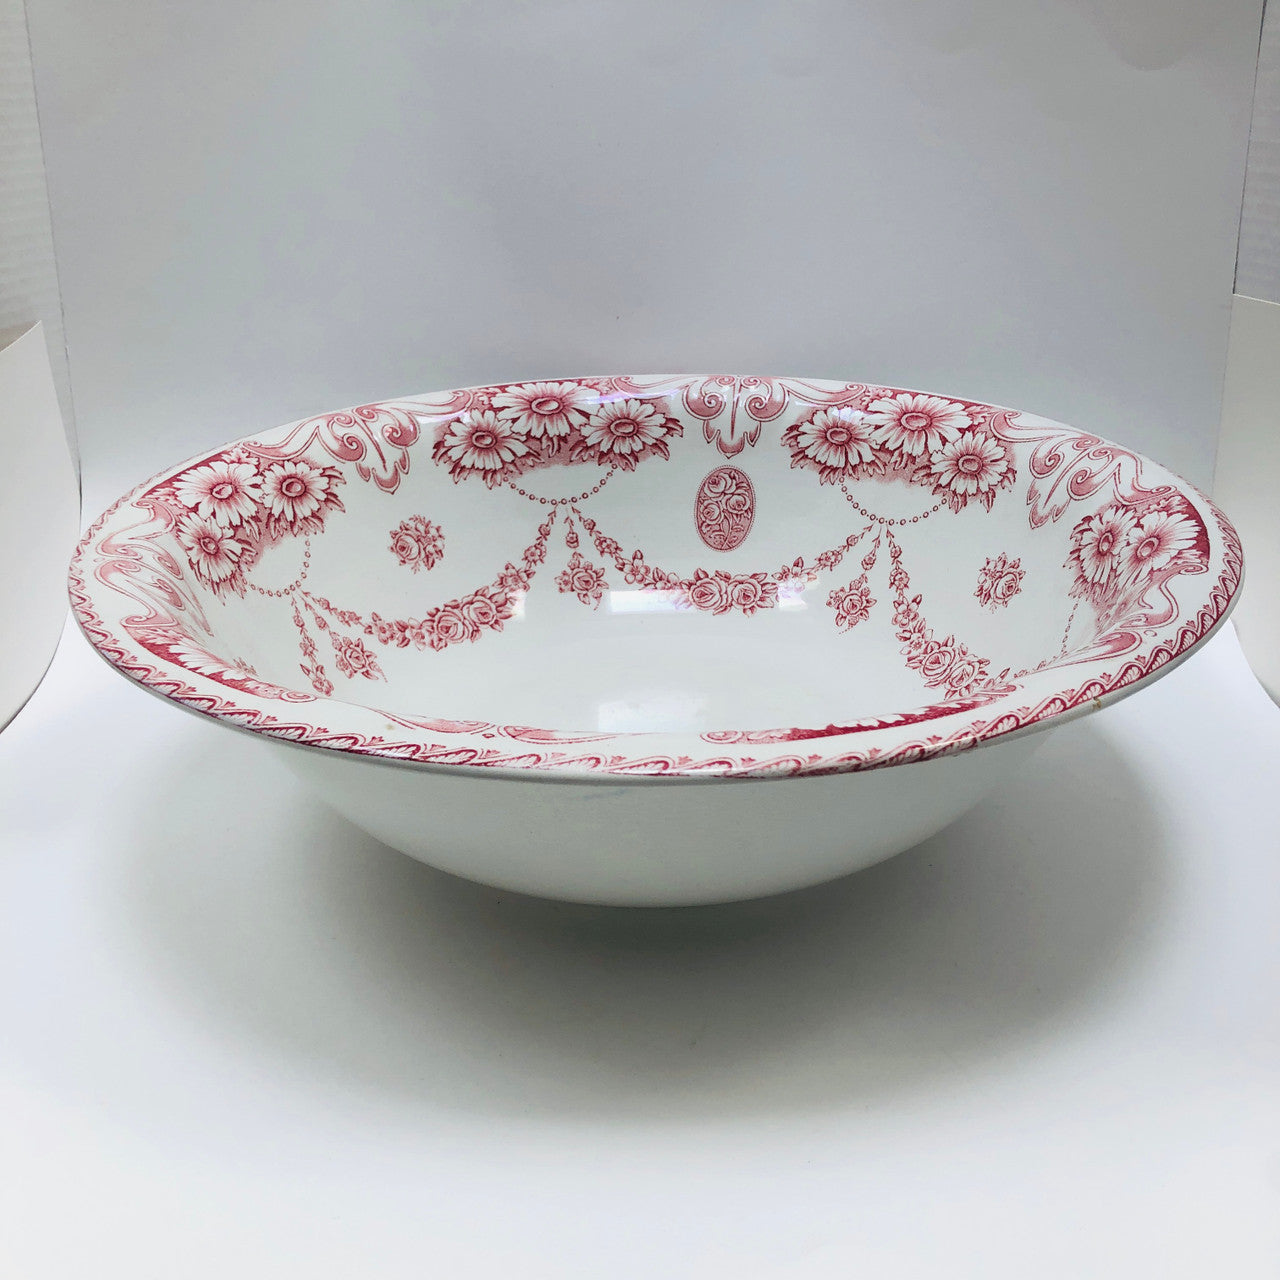 Antique Wash Basin, Semi-Porcelain, Crown Trent, W. Adams& Sons, England, Pink on White